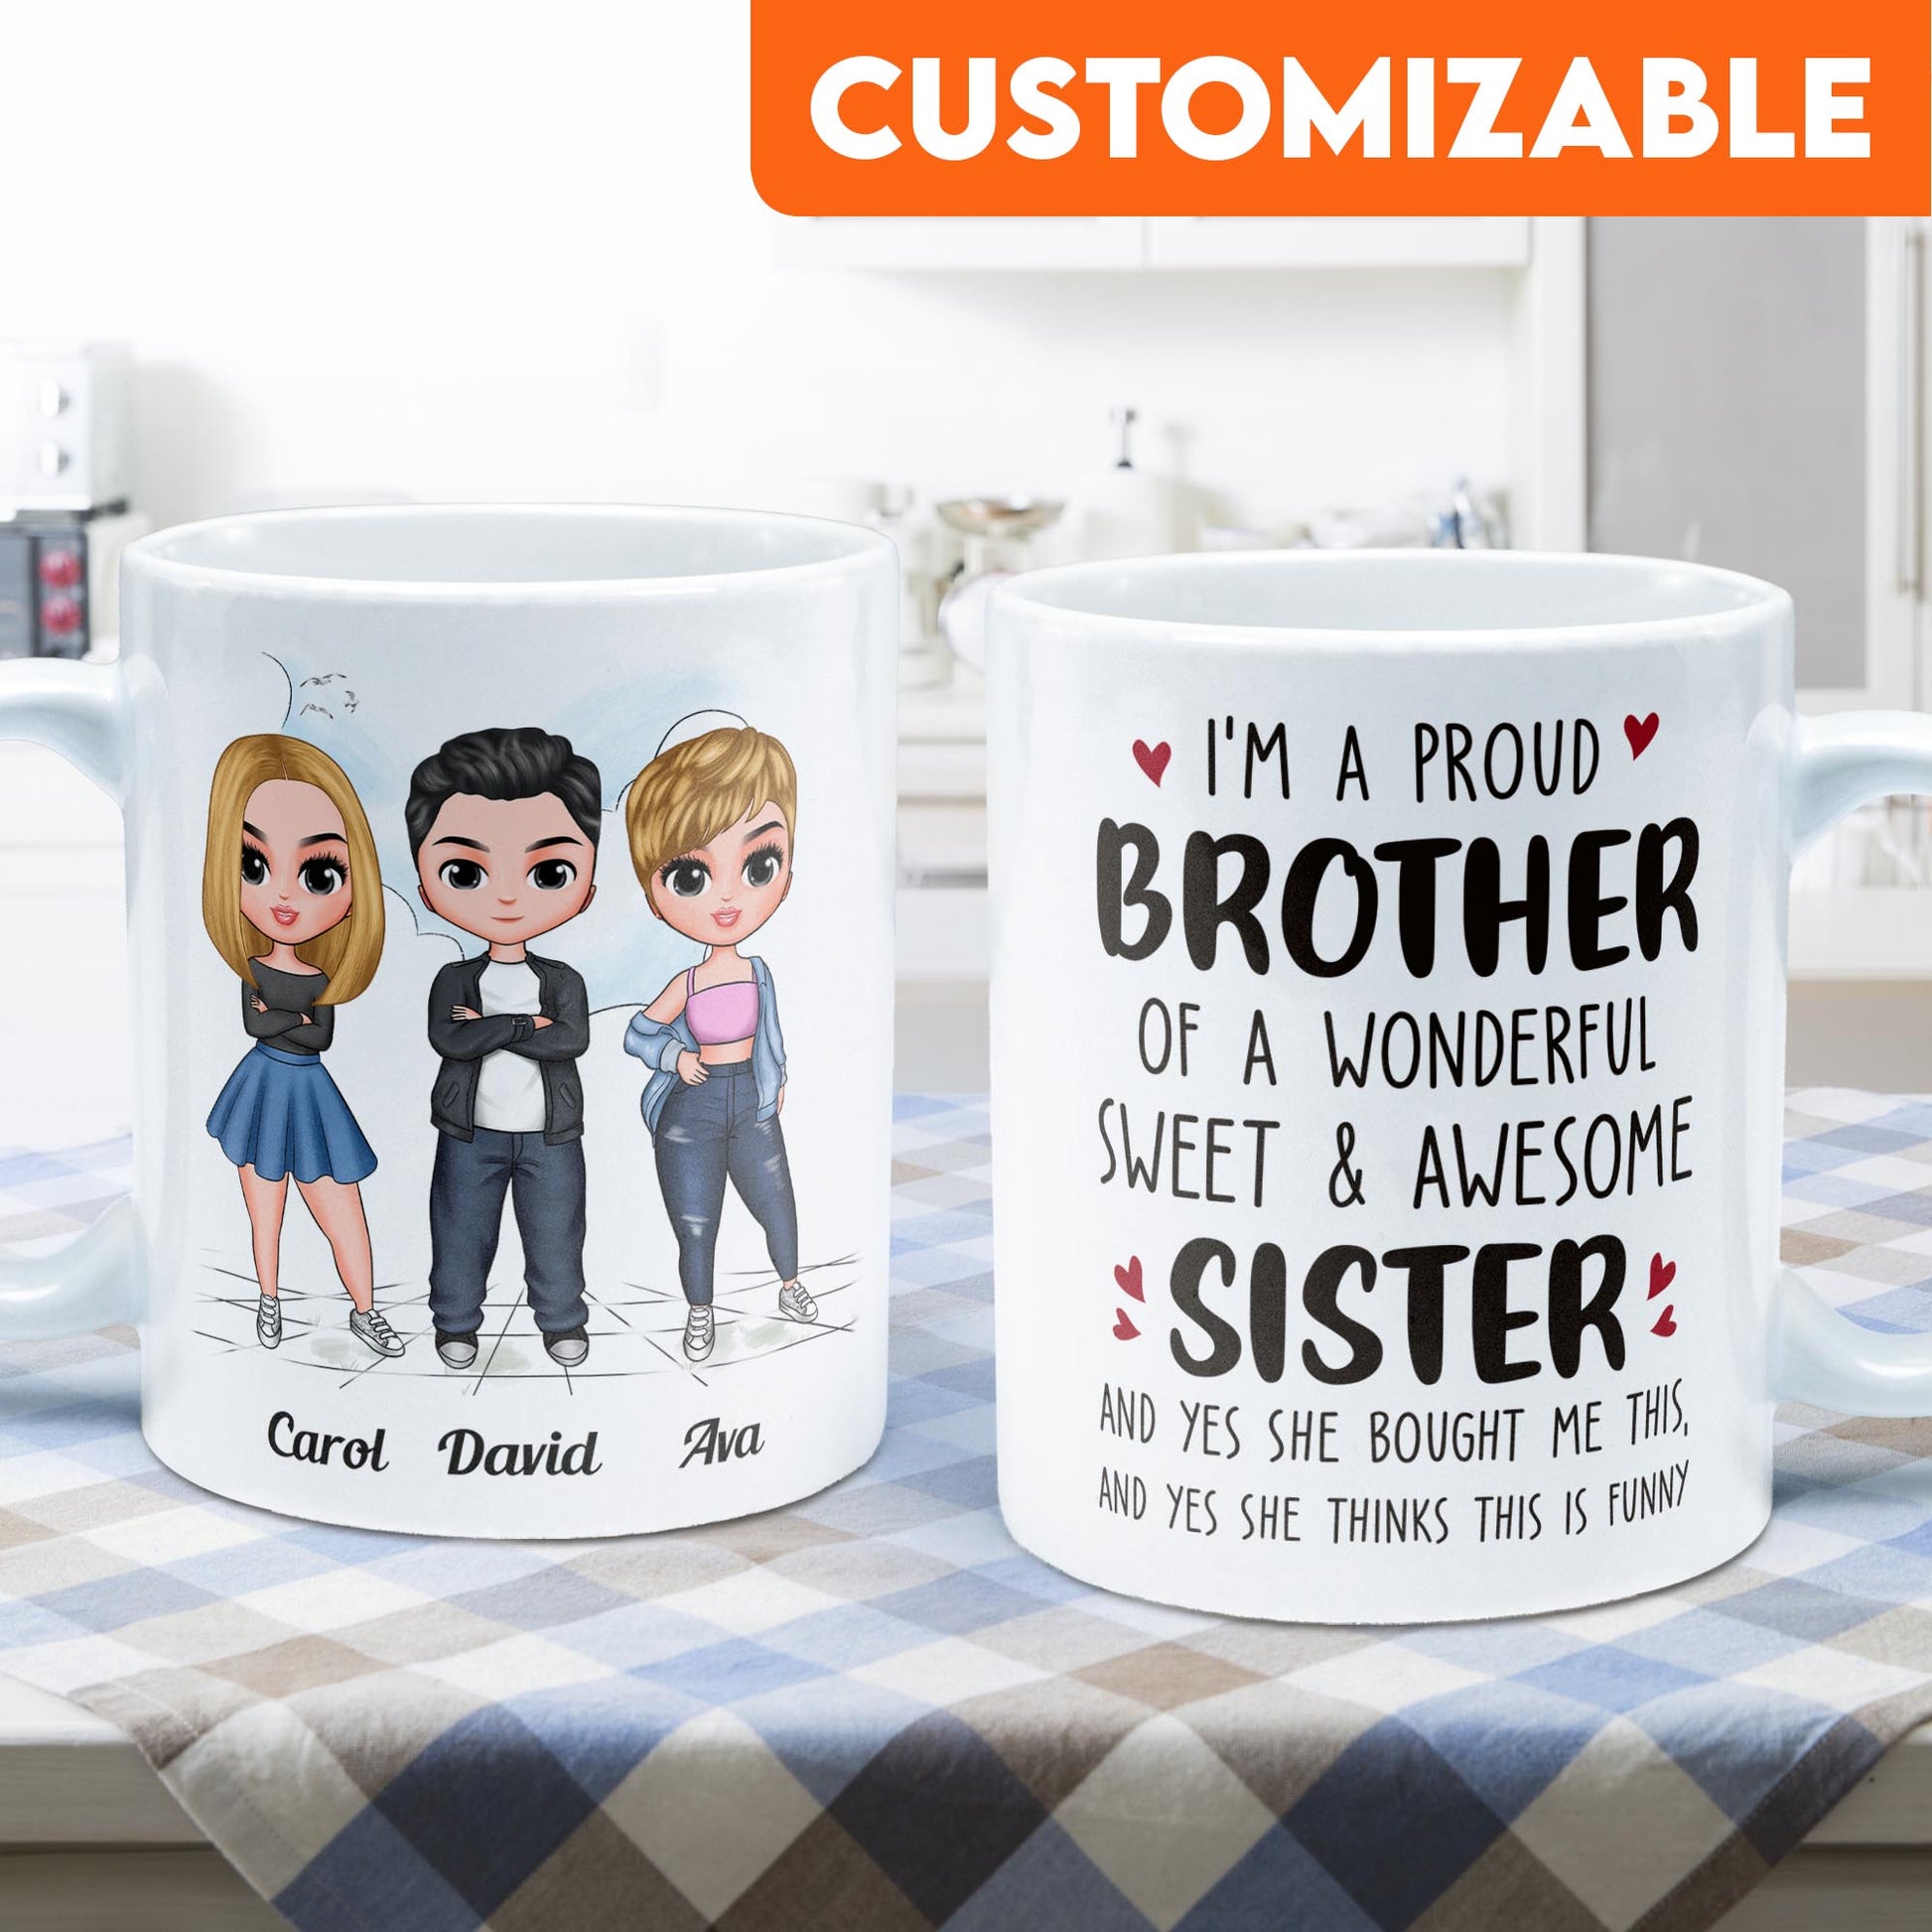 Proud Brother Of A Wonderful & Sweet Sister - Personalized Mug - Birthday Gift For Brothers, Sisters